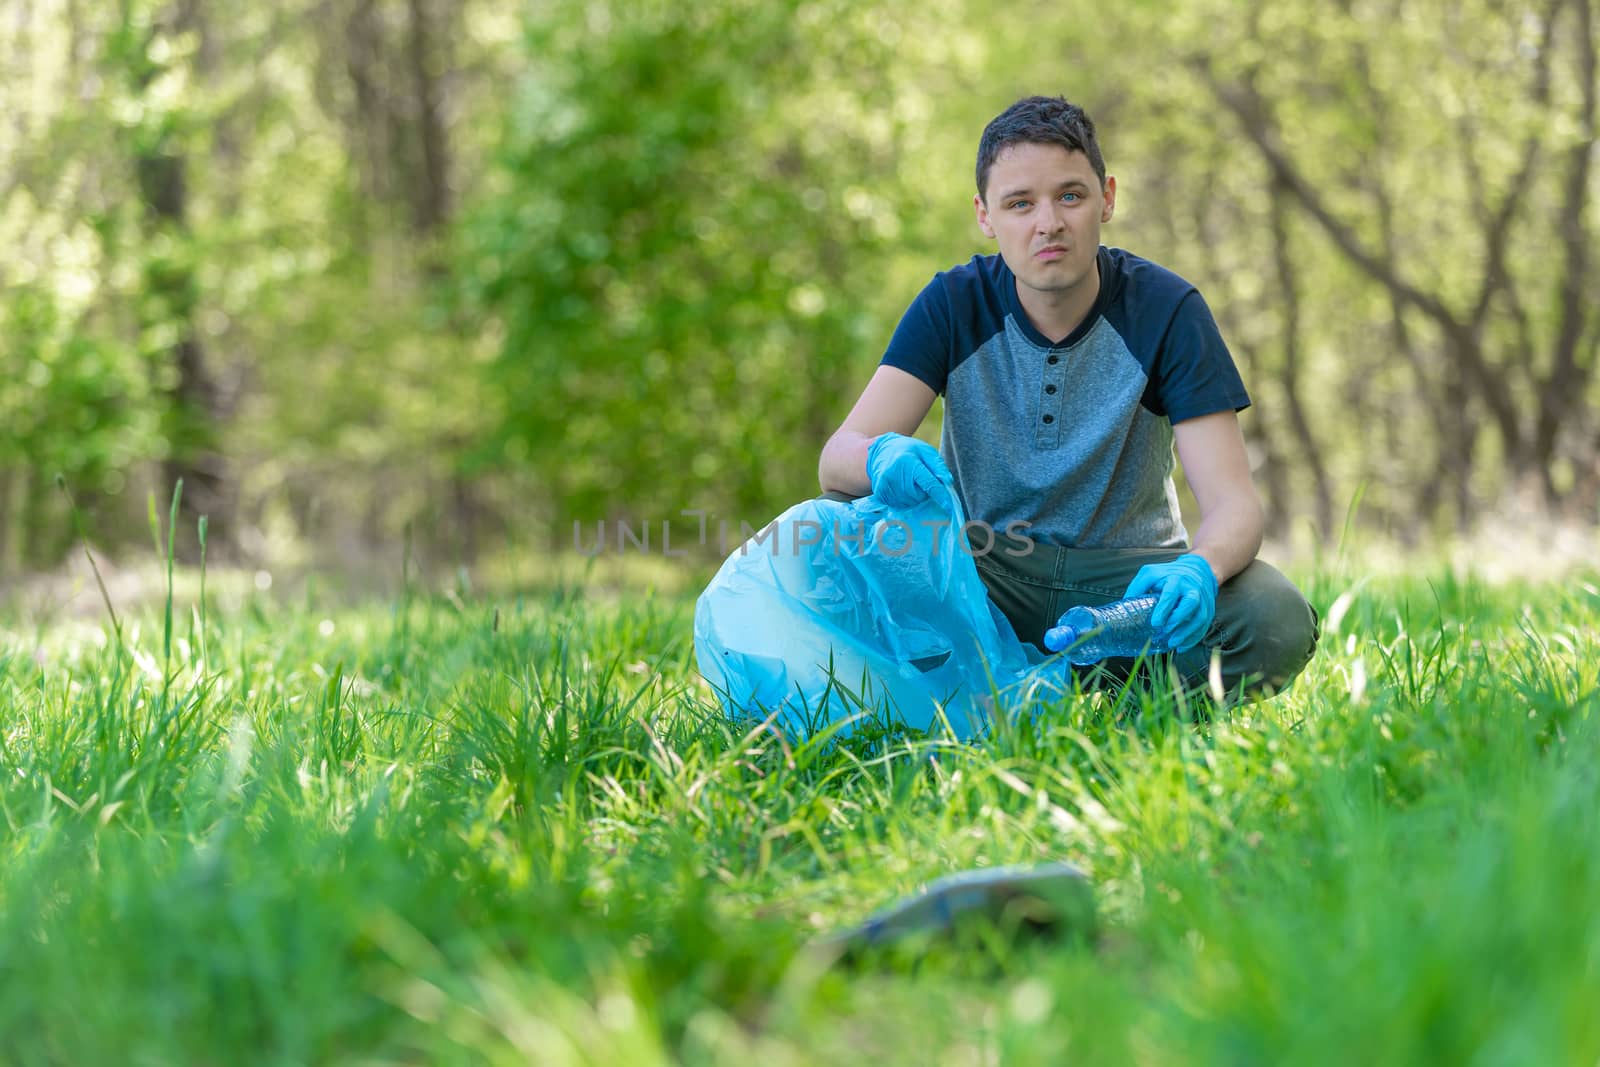 The volunteer cleans the forest from garbage, protects the environment.